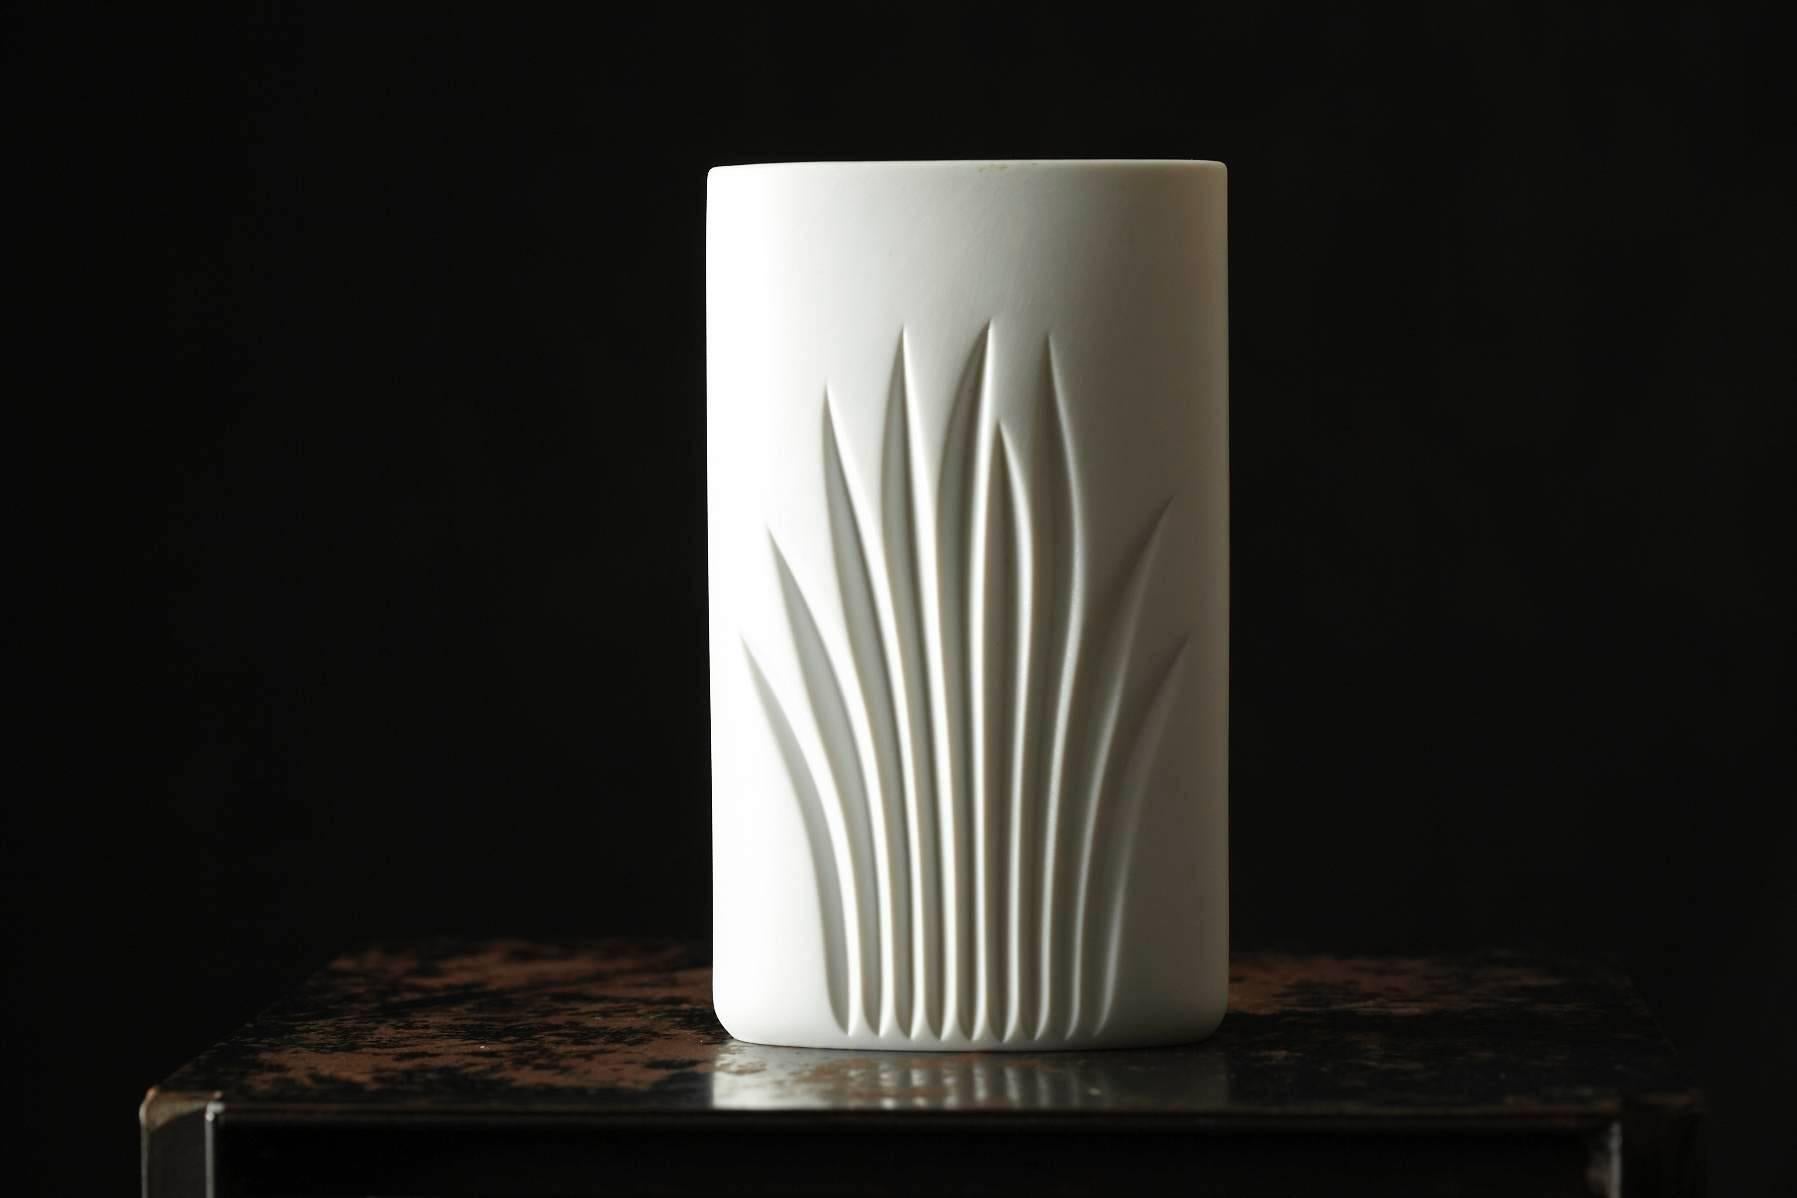 Beautiful white matte oval porcelain vase with Minimalist foliage designed by Claus Josef Riedel for Rosenthal Studio Line.
Special edition for the 100th anniversary year of Rosenthal, 1979.
Marked on the base-100 Jahre Rosenthal, Rosenthal studio